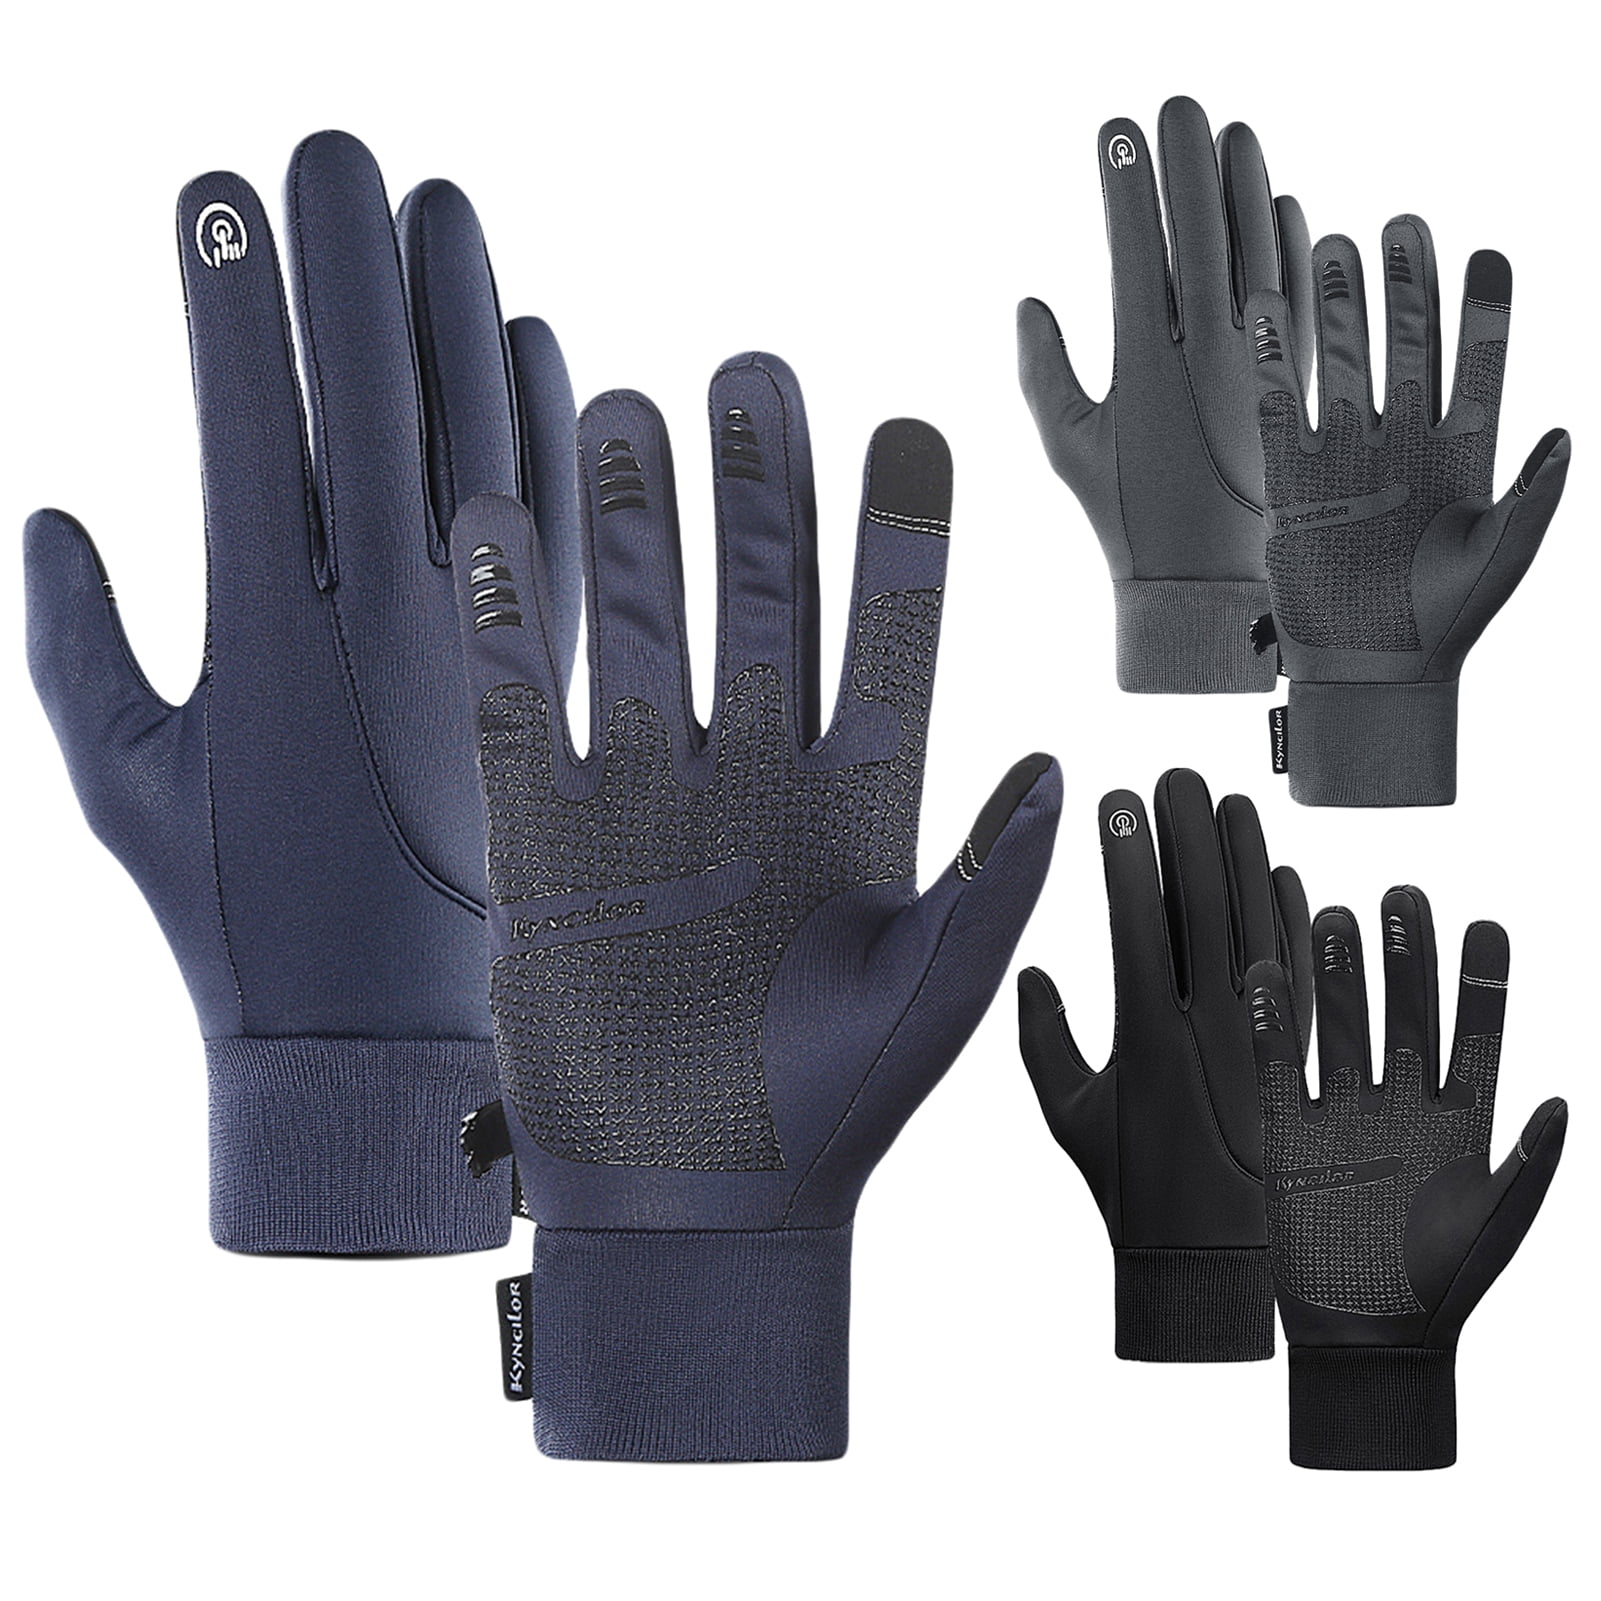 Winter Gloves Men Women Touchscreen Water-Resistant for Driving Running Cycling Thermal Glove Warm Gifts